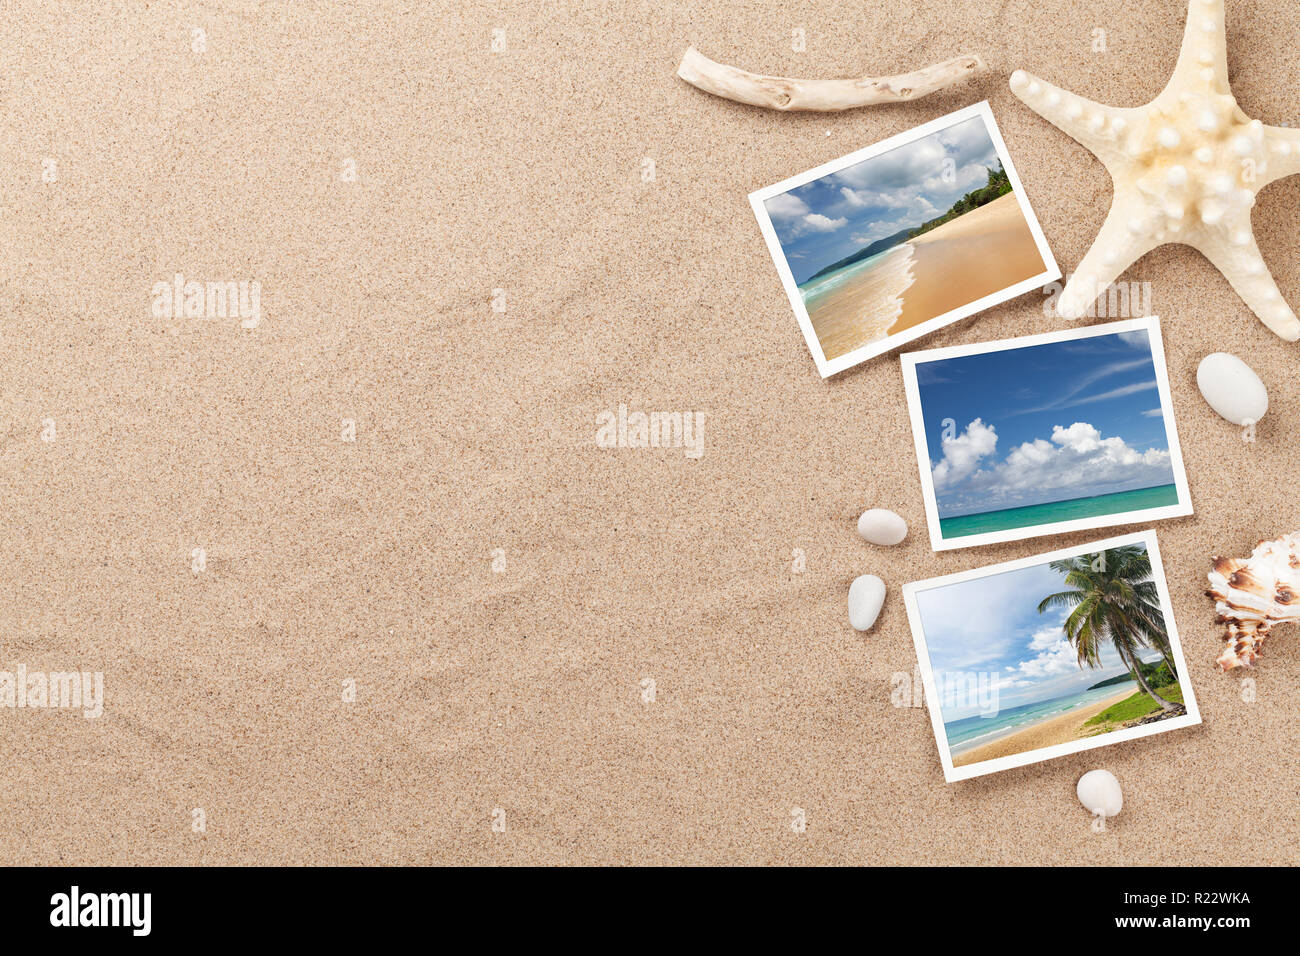 Travel vacation background concept with starfish, seashells and photos on sand backdrop. Top view with copy space. Flat lay. All photos taken by me Stock Photo